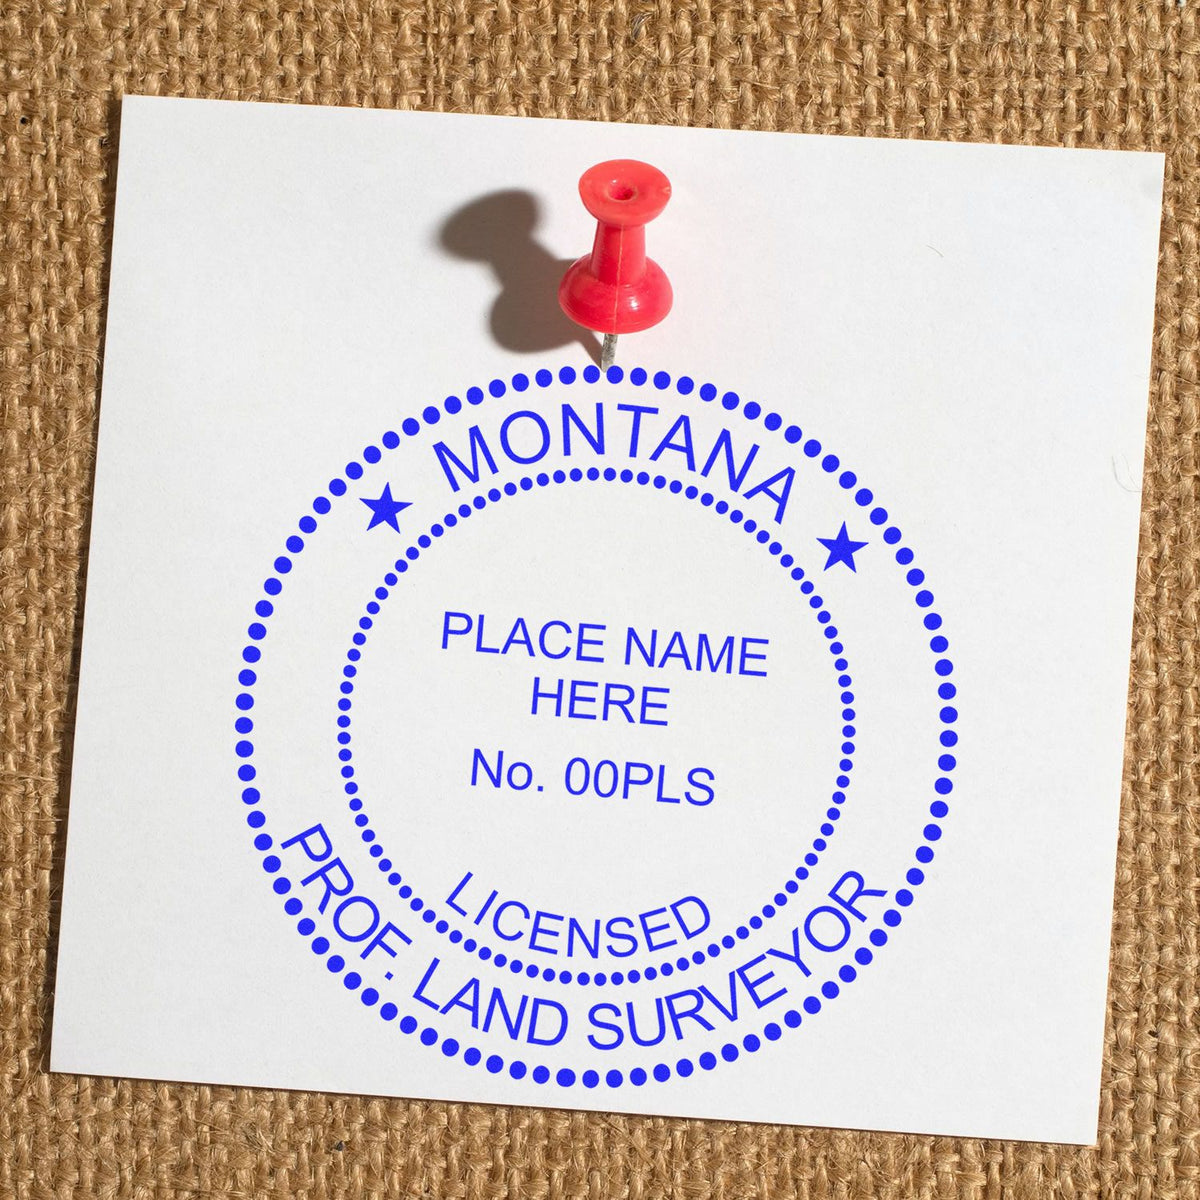 A lifestyle photo showing a stamped image of the Slim Pre-Inked Montana Land Surveyor Seal Stamp on a piece of paper